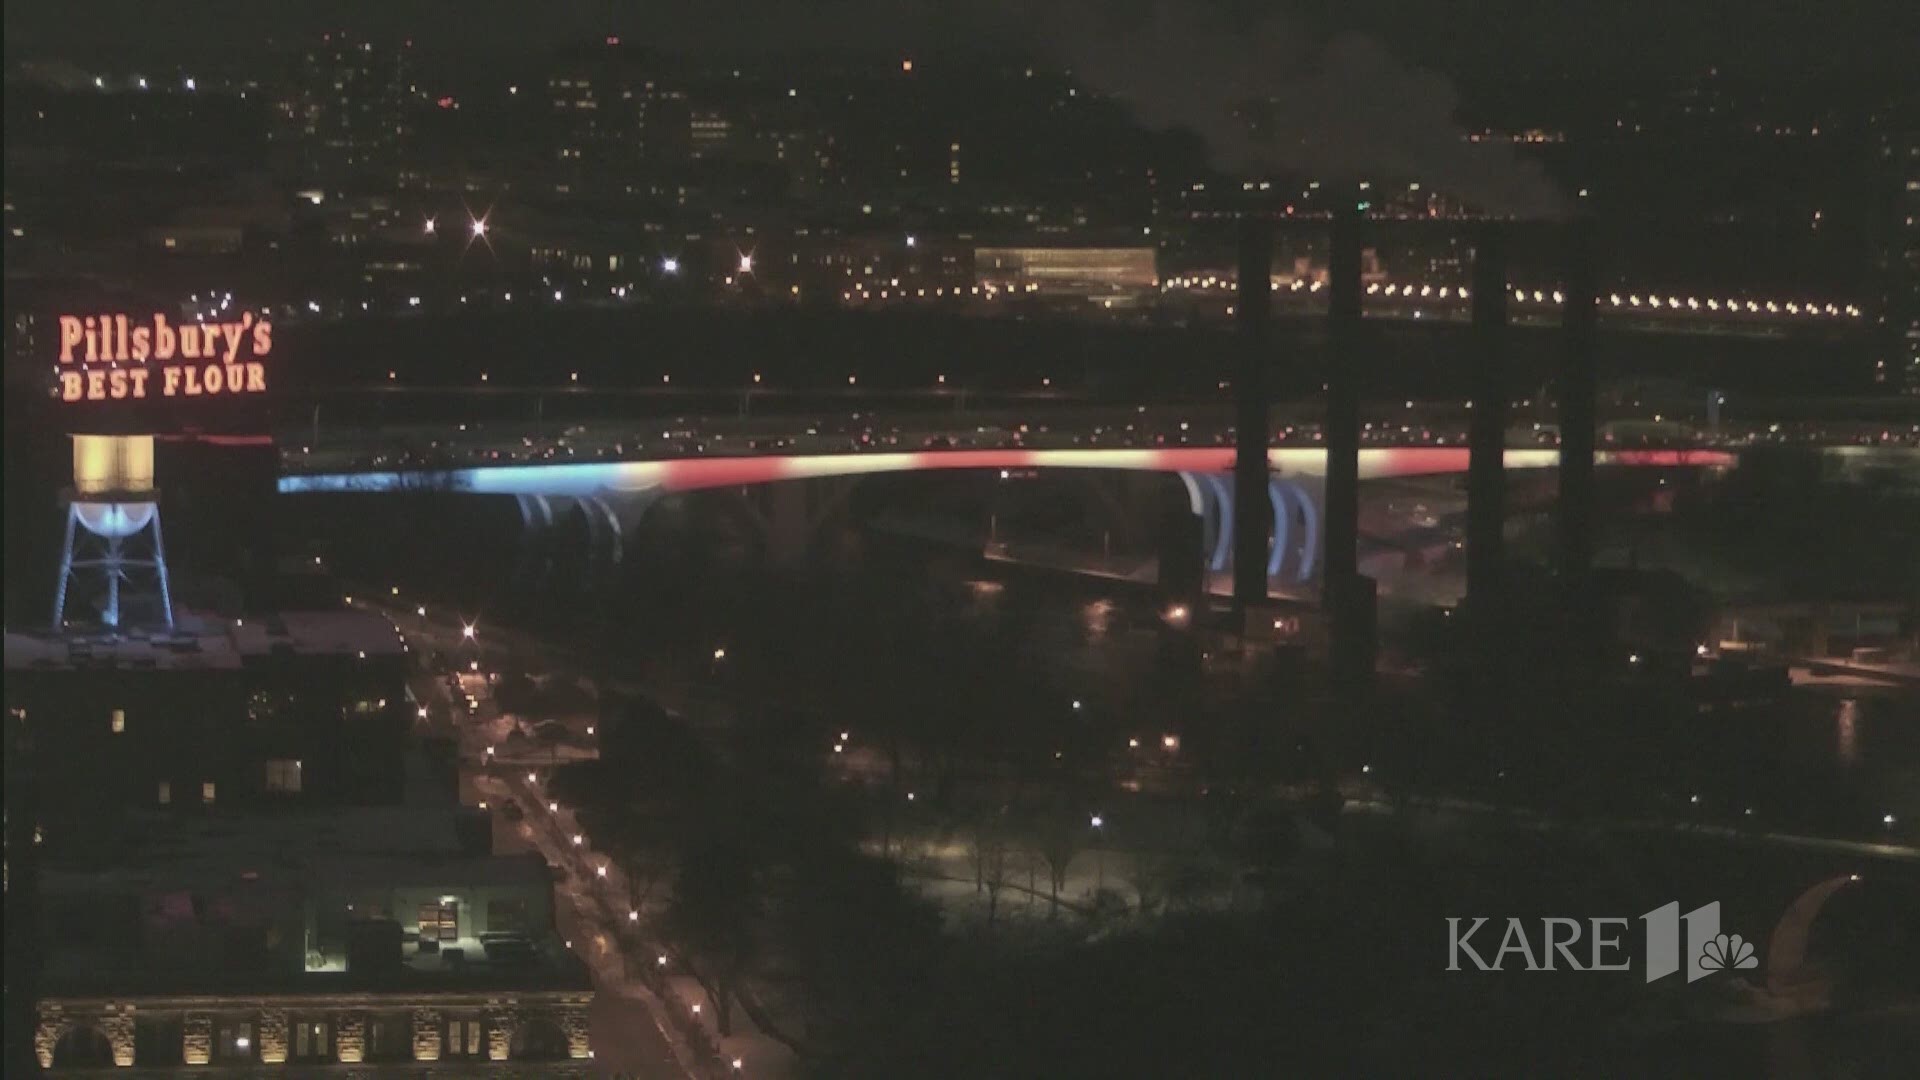 The I-35W St. Anthony Falls bridge in Minneapolis will be lit red, white and blue tonight, in honor of the 3 guardsmen lost in yesterday's helicopter crash.